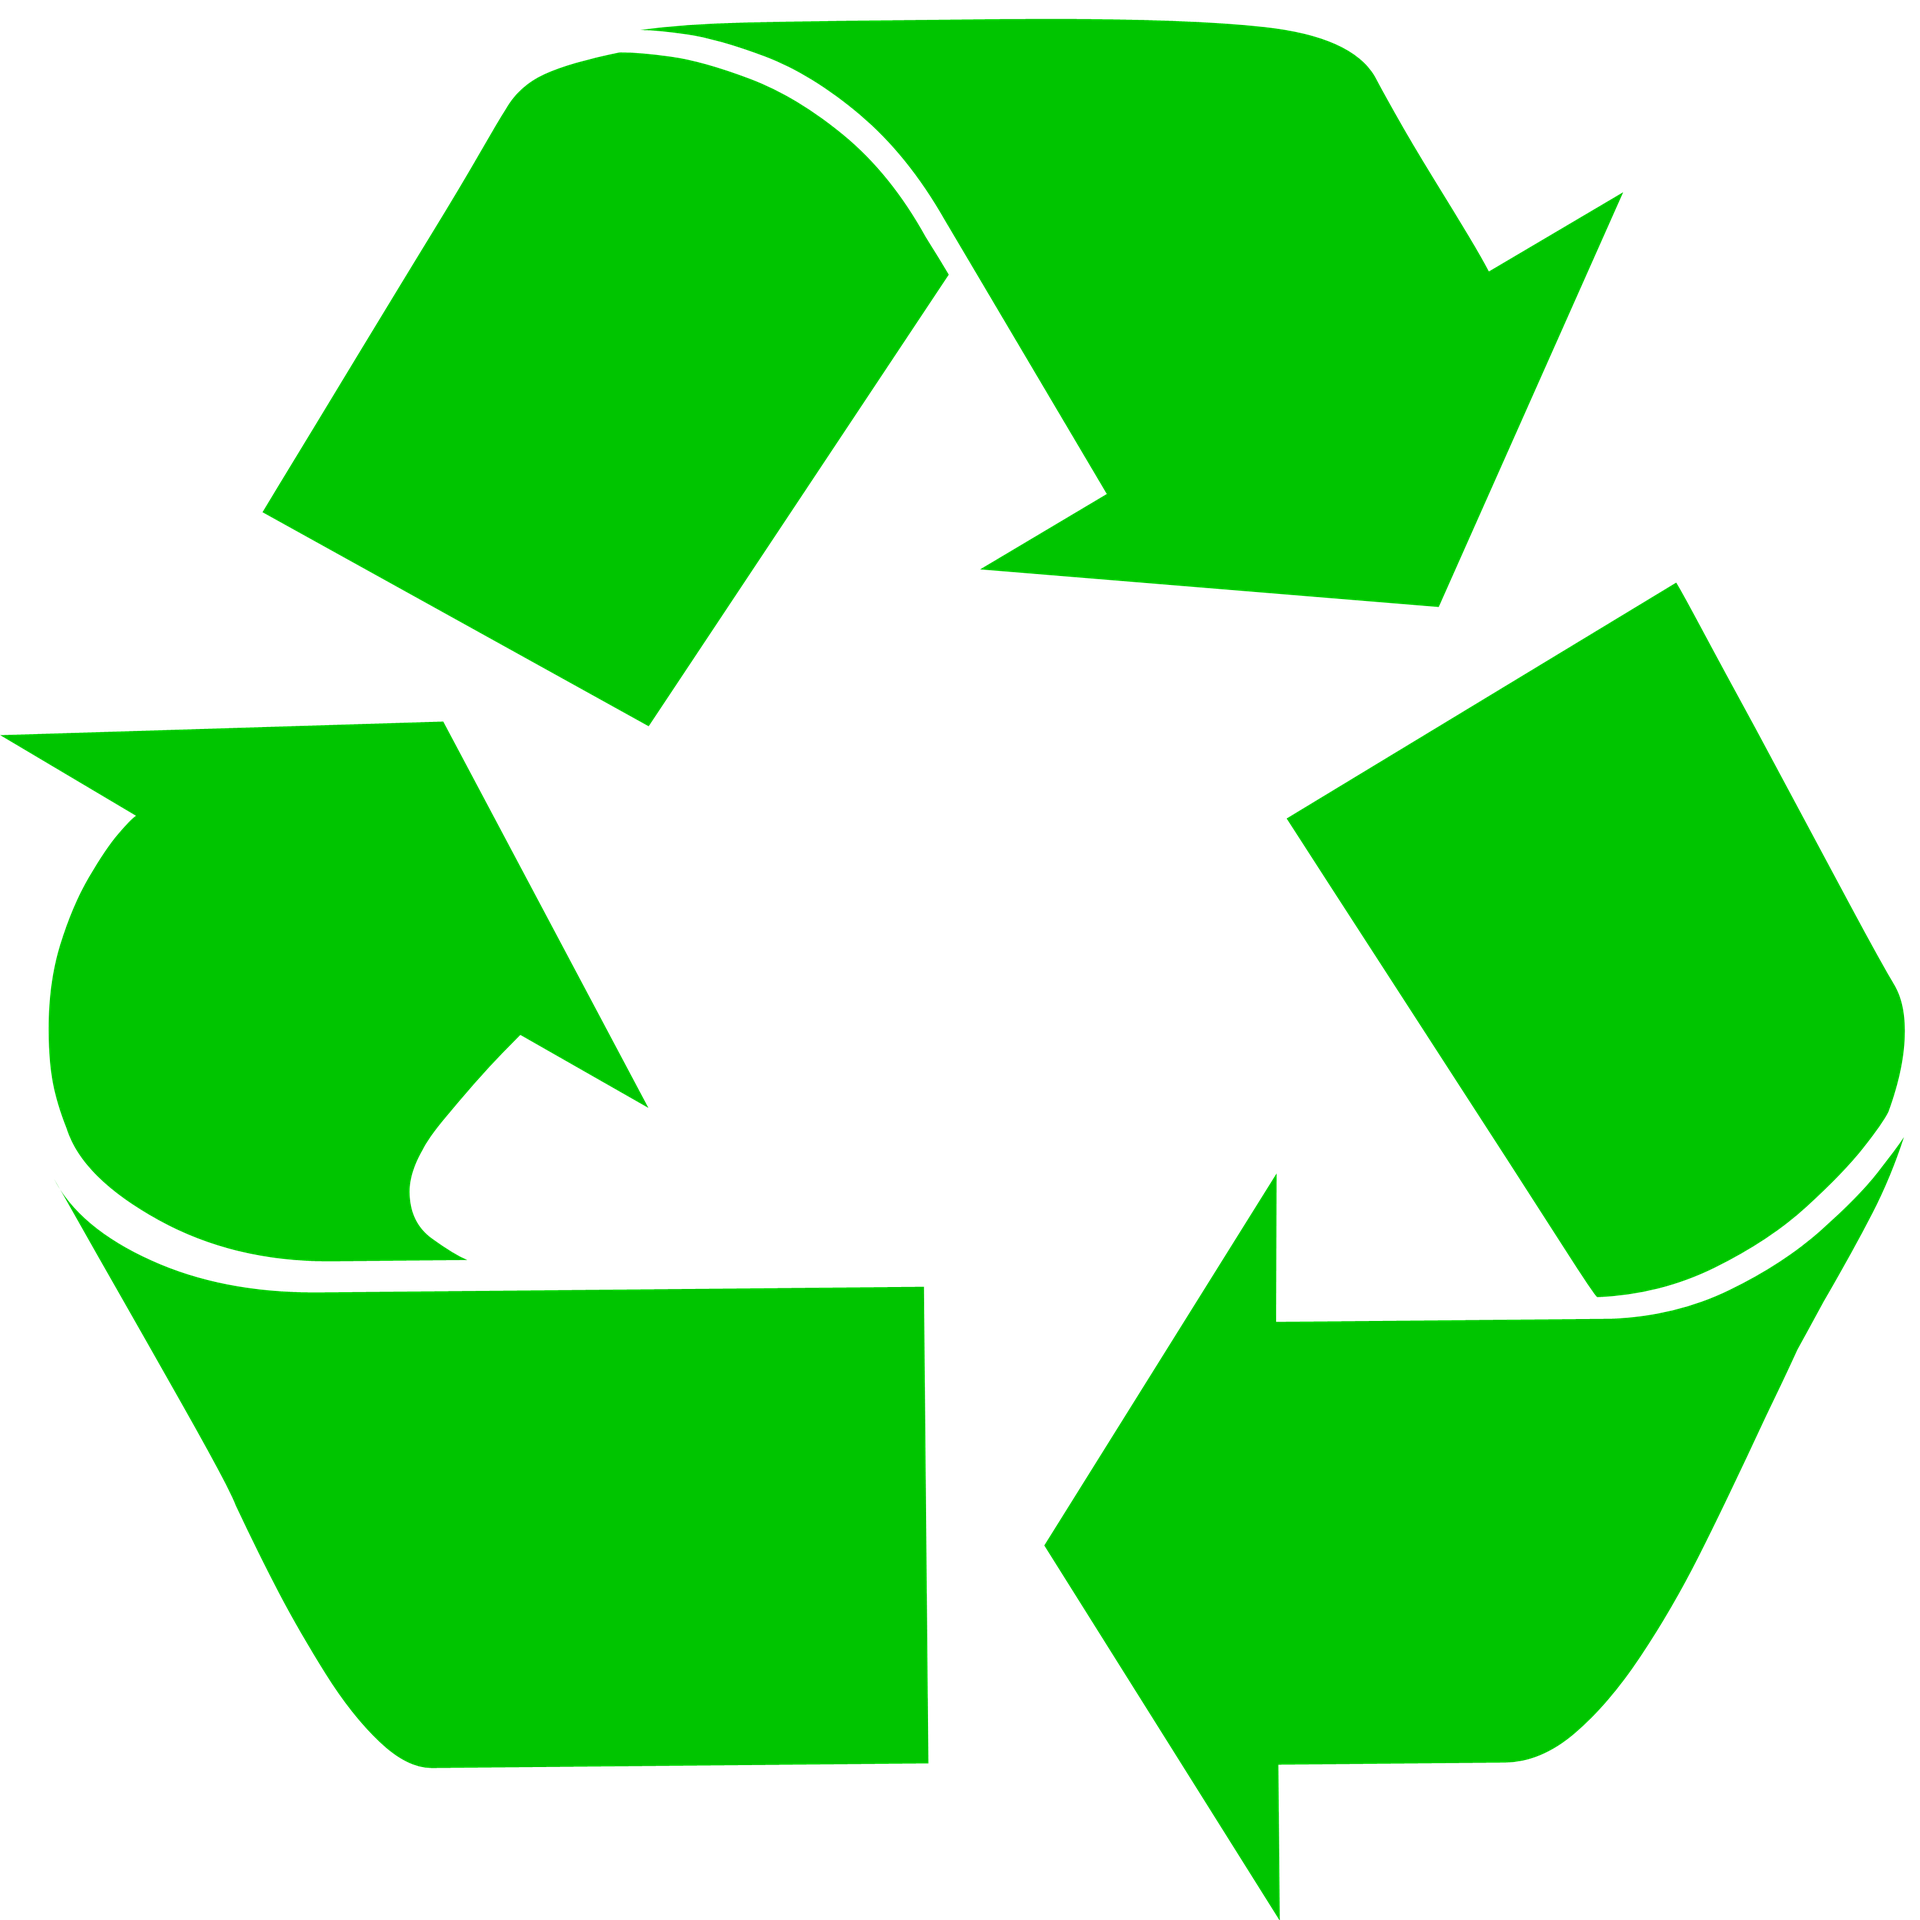 recycling-1341372_1920.png